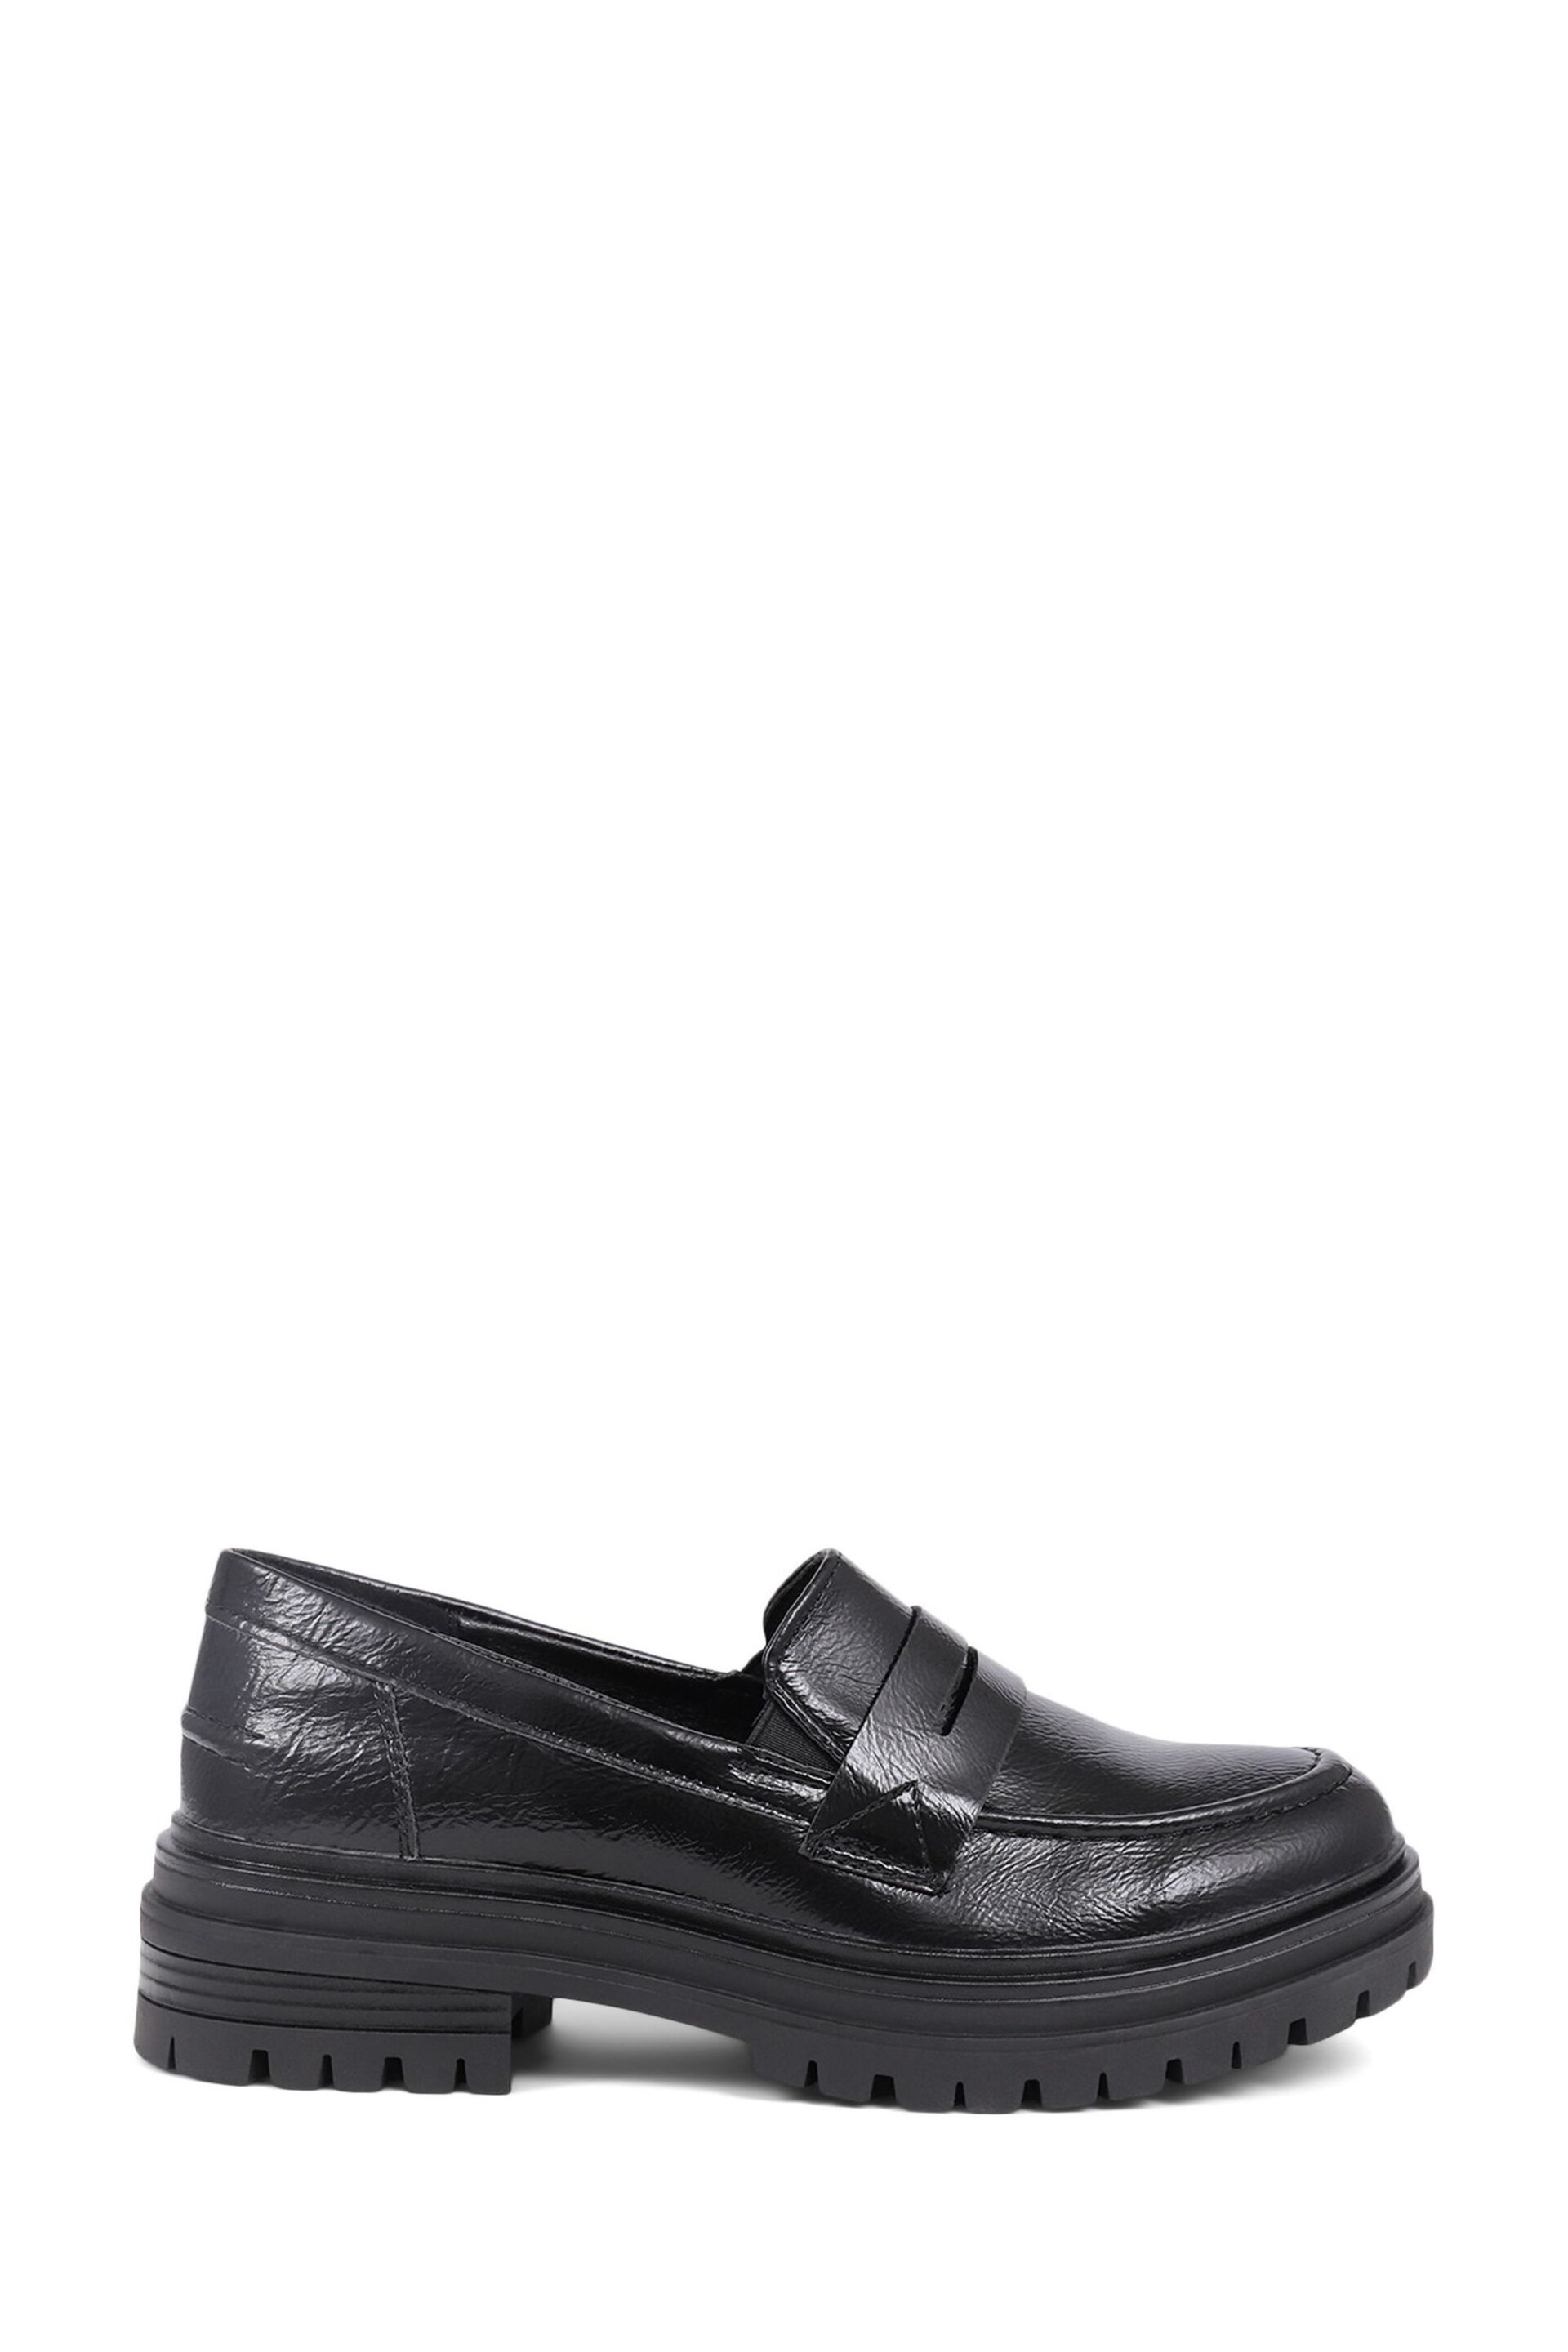 Pavers Chunky Black Loafers - Image 1 of 5